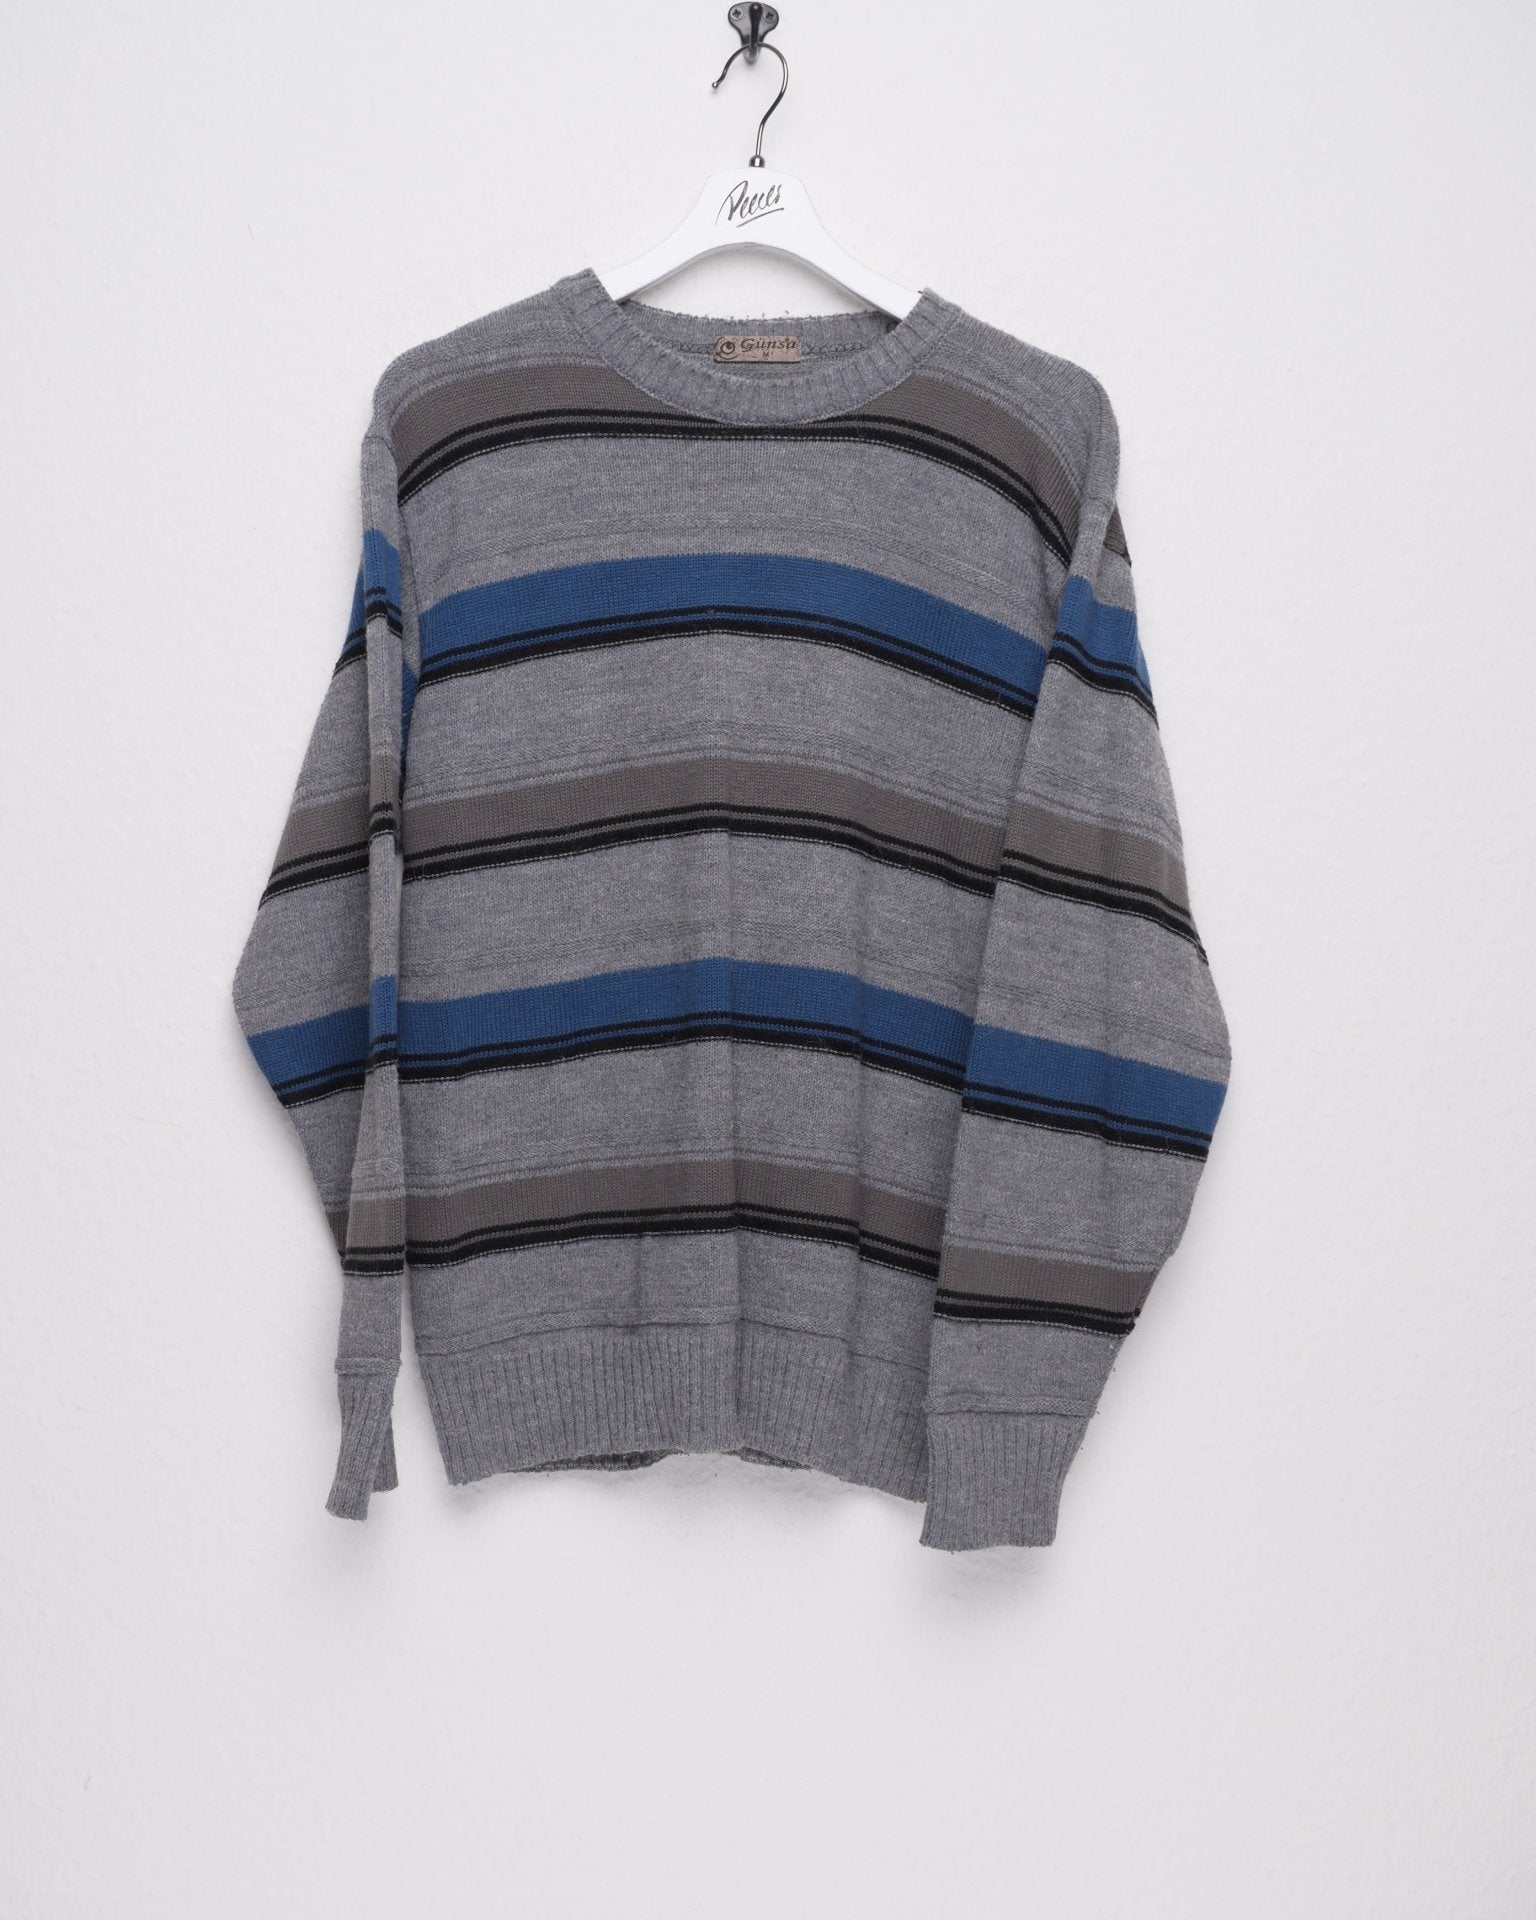 Knitted multicolored Wool Sweater - Peeces